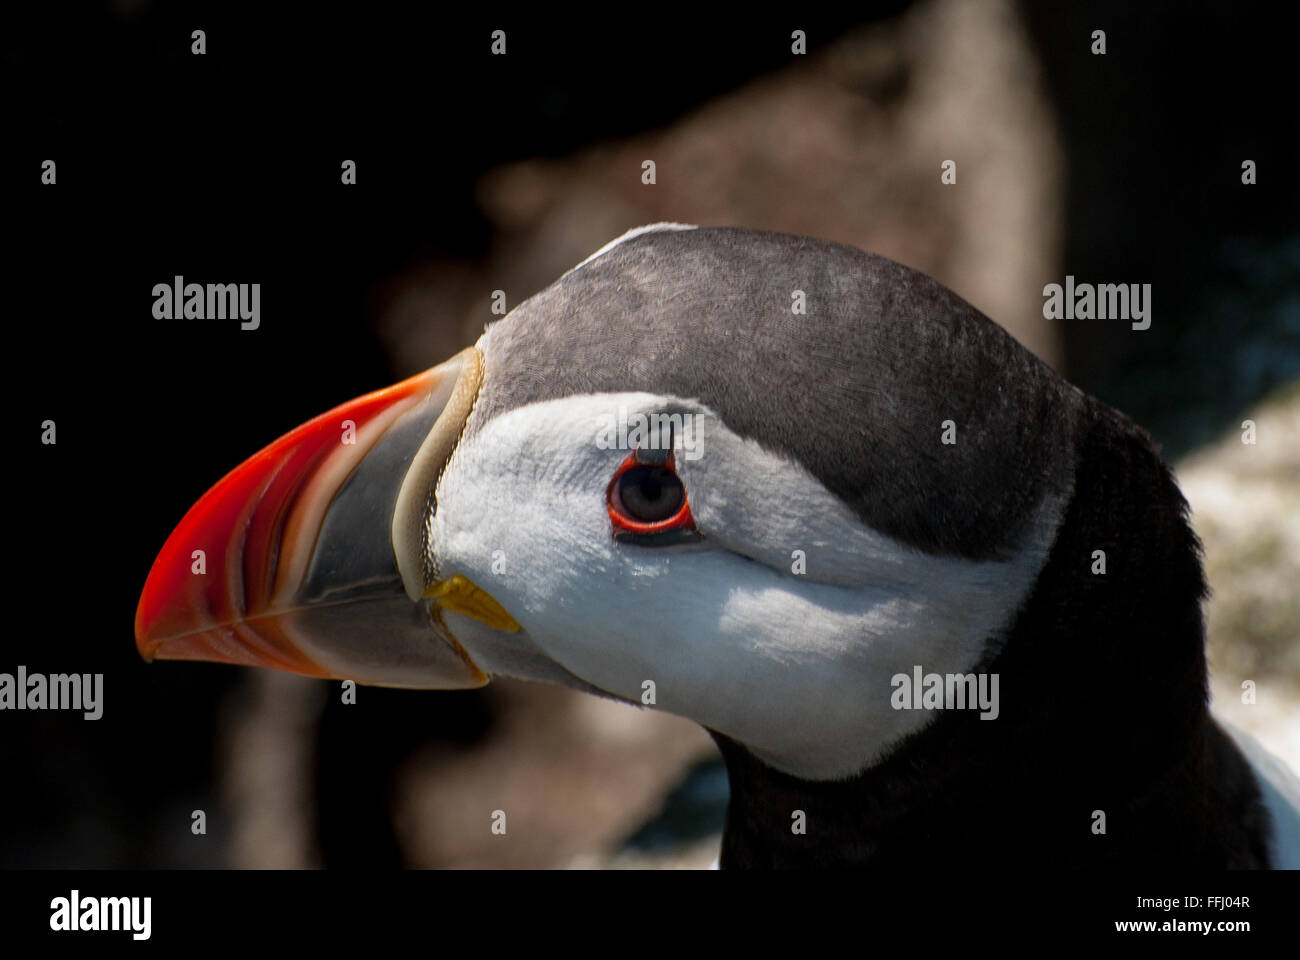 During breeding season the adult Atlantic puffin has a colorful beak. It is a protected species of bird which resembles a parrot, in northern Maine. Stock Photo